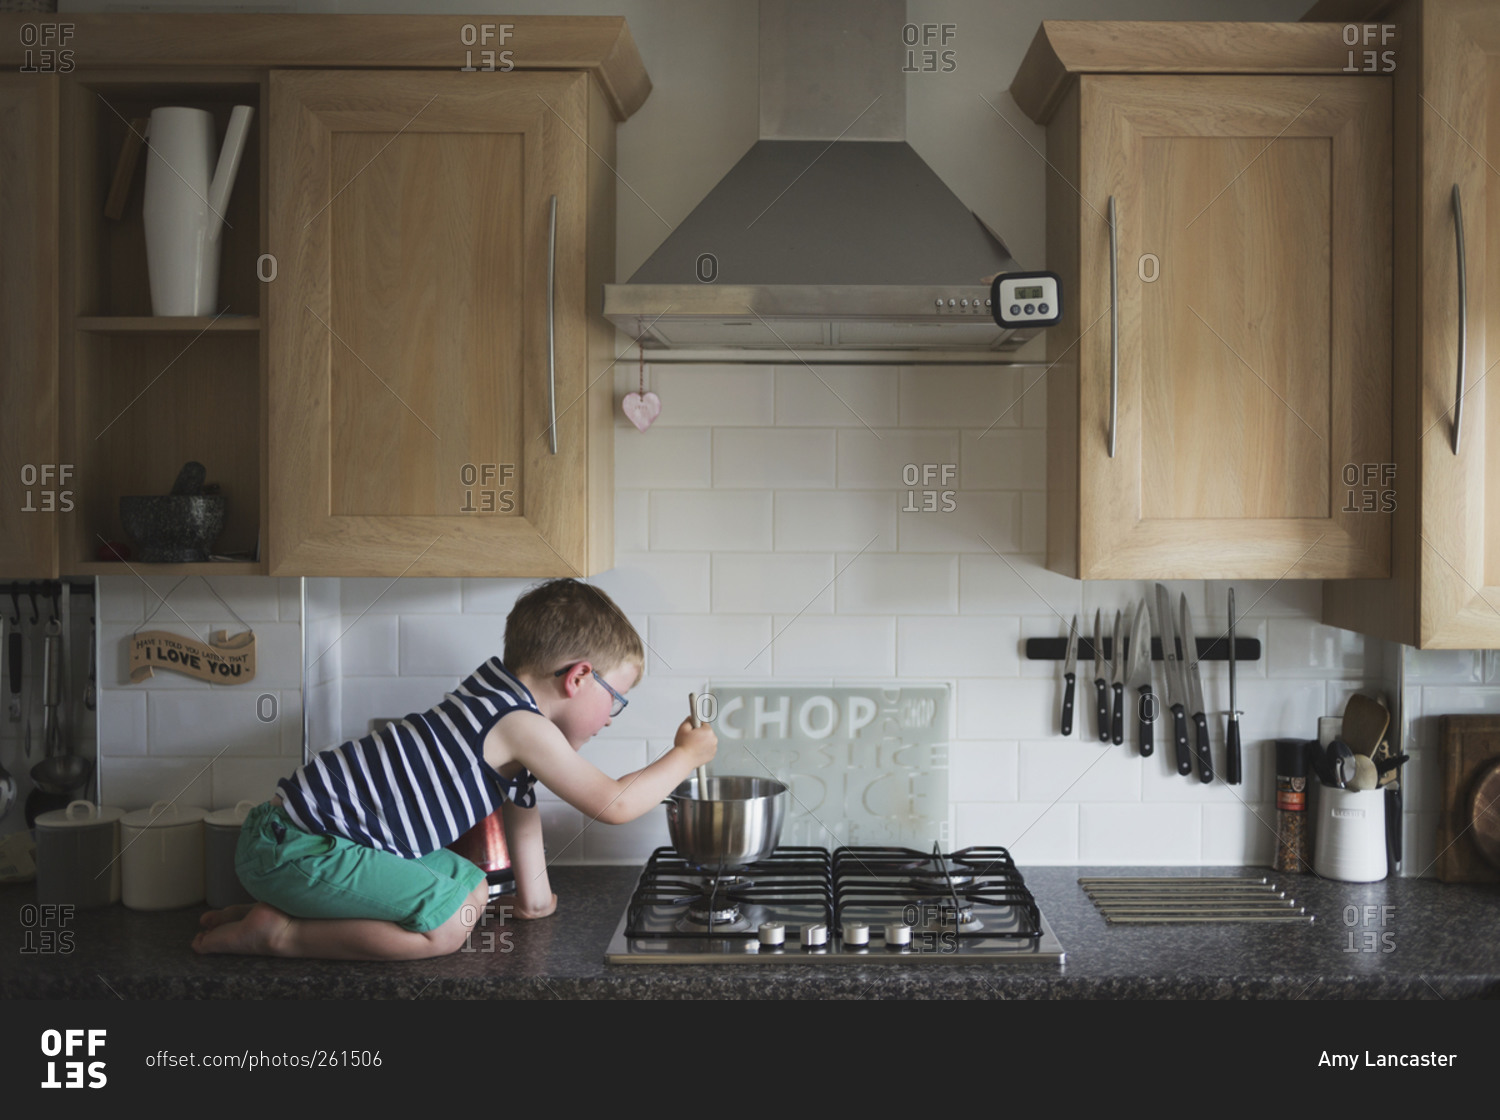 Young boy kneeling on counter stirring a pot on stove